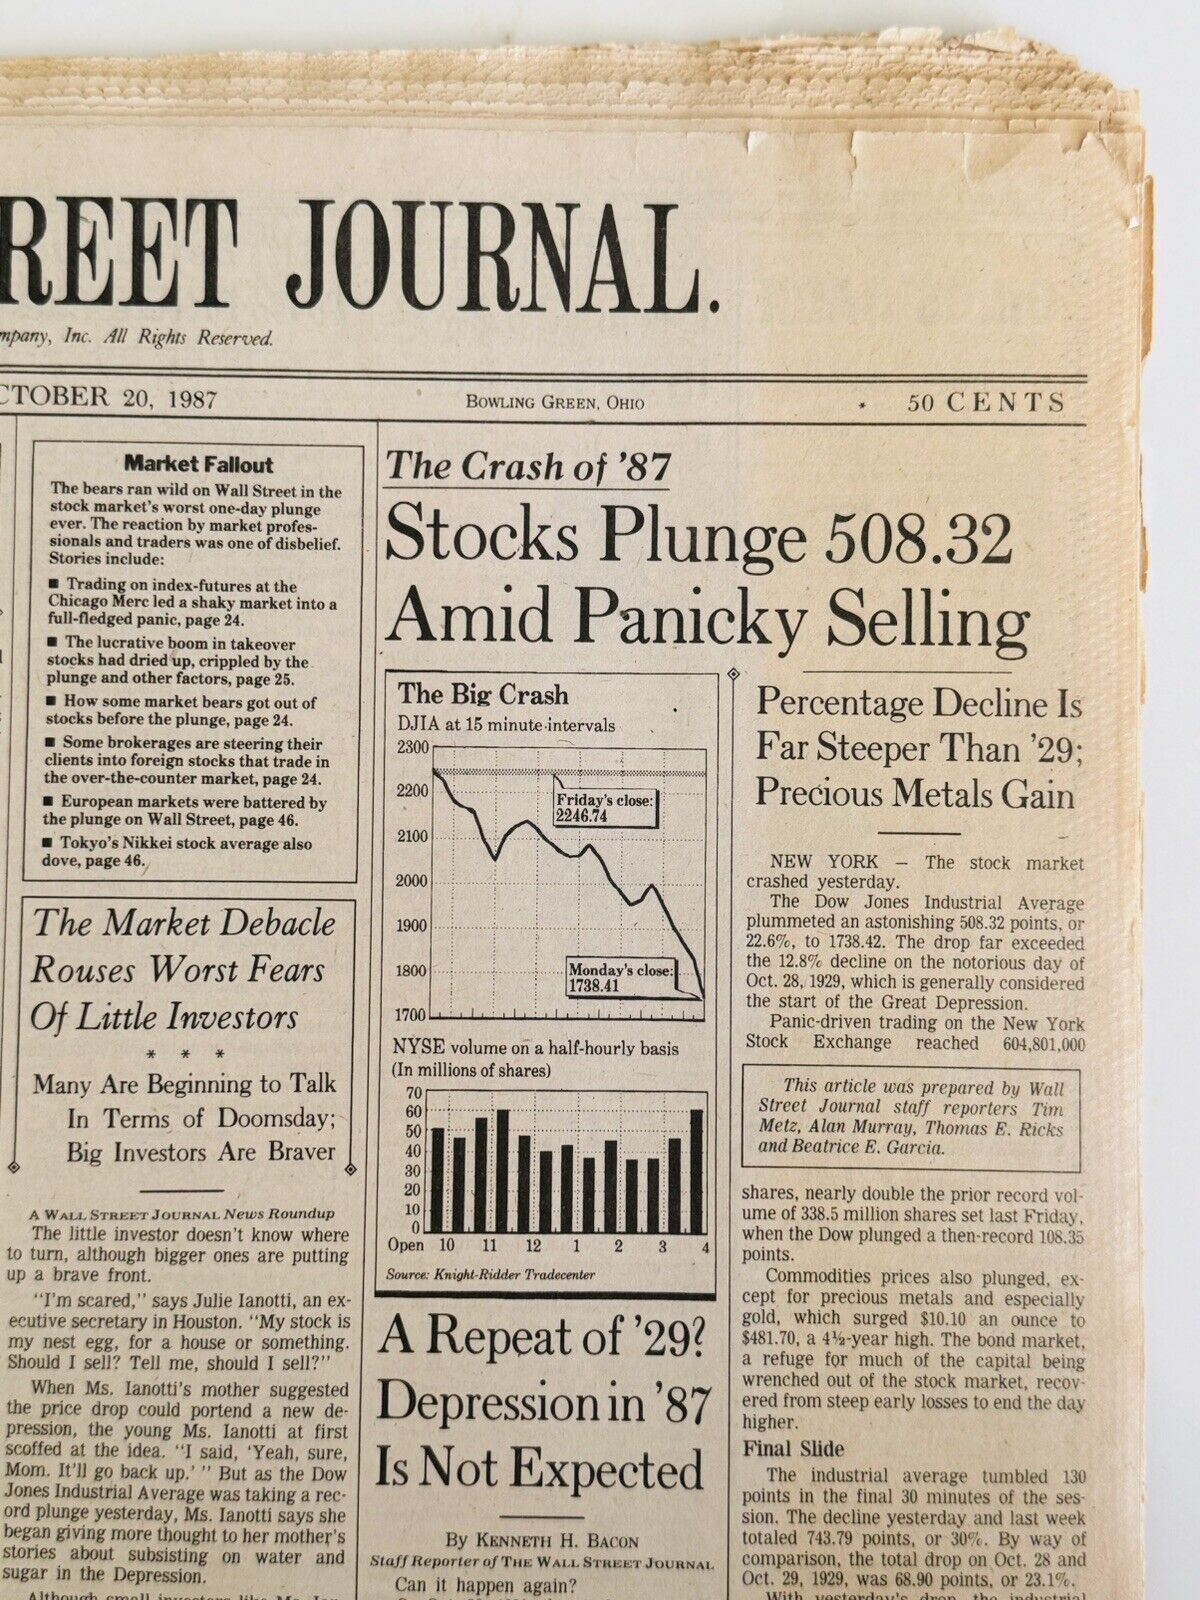 BLACK MONDAY / The Crash of '87 / The Wall Street Journal / October 20, 1987